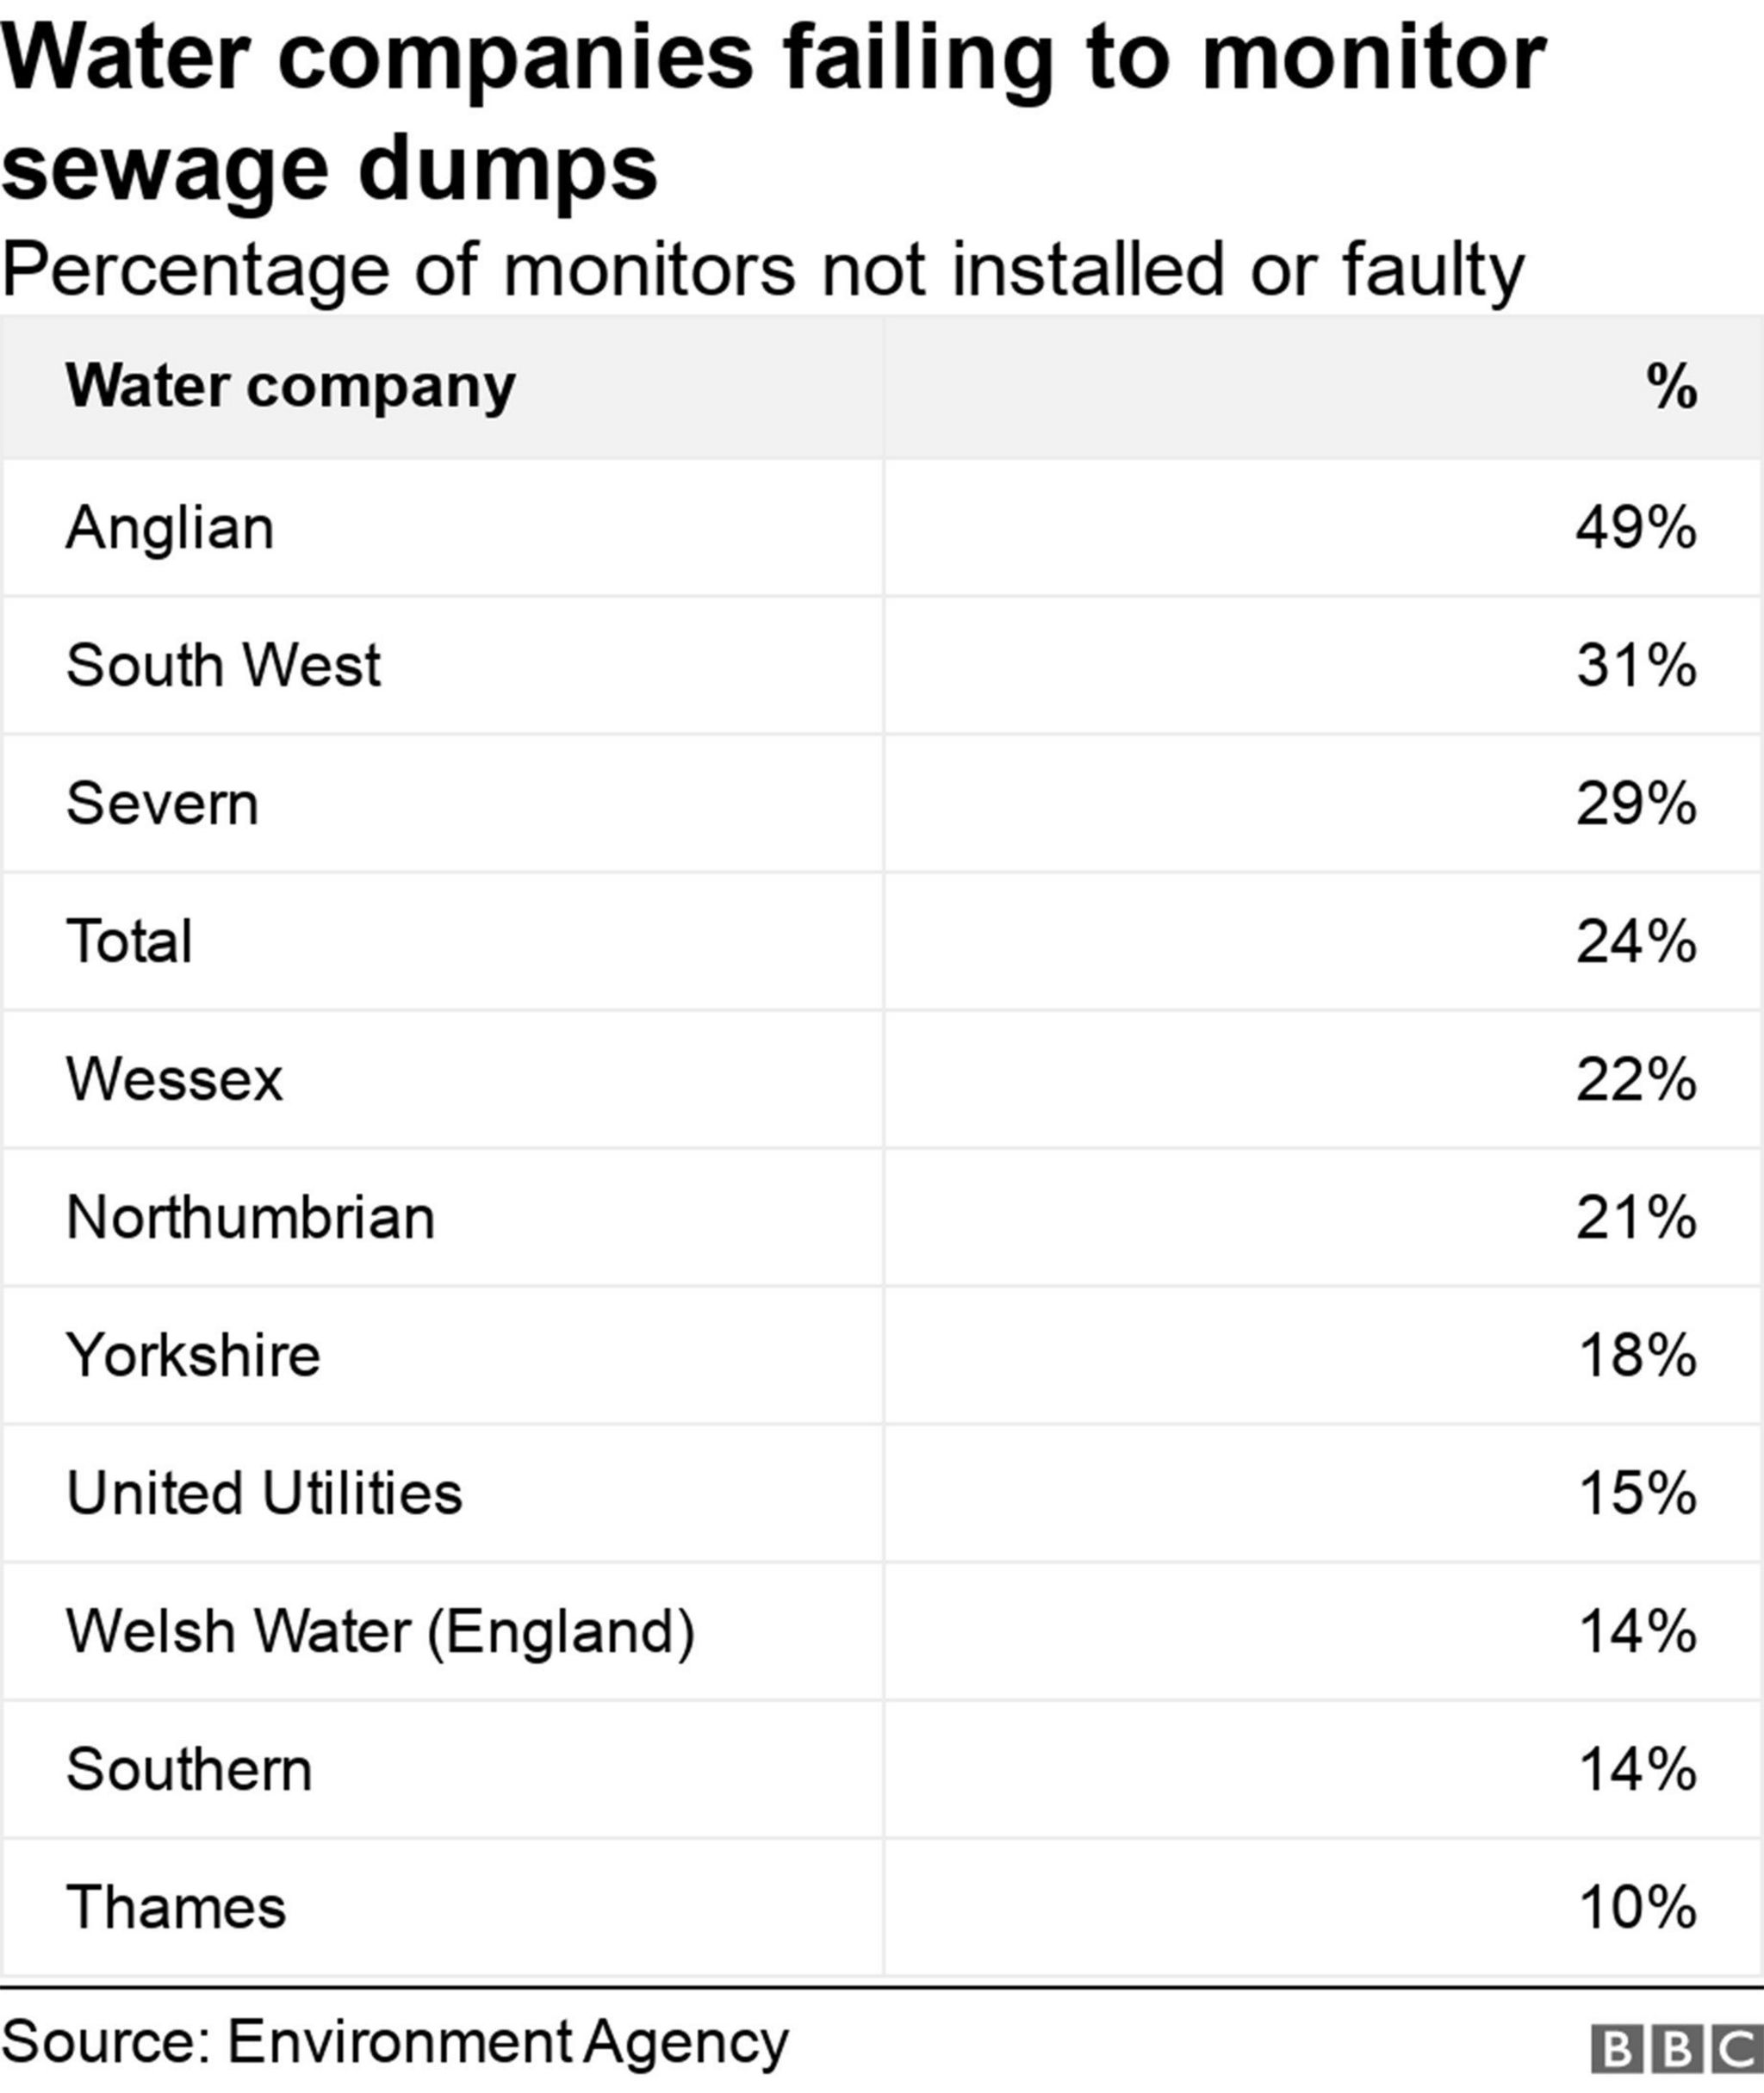 Chart showing water companies and monitor faults